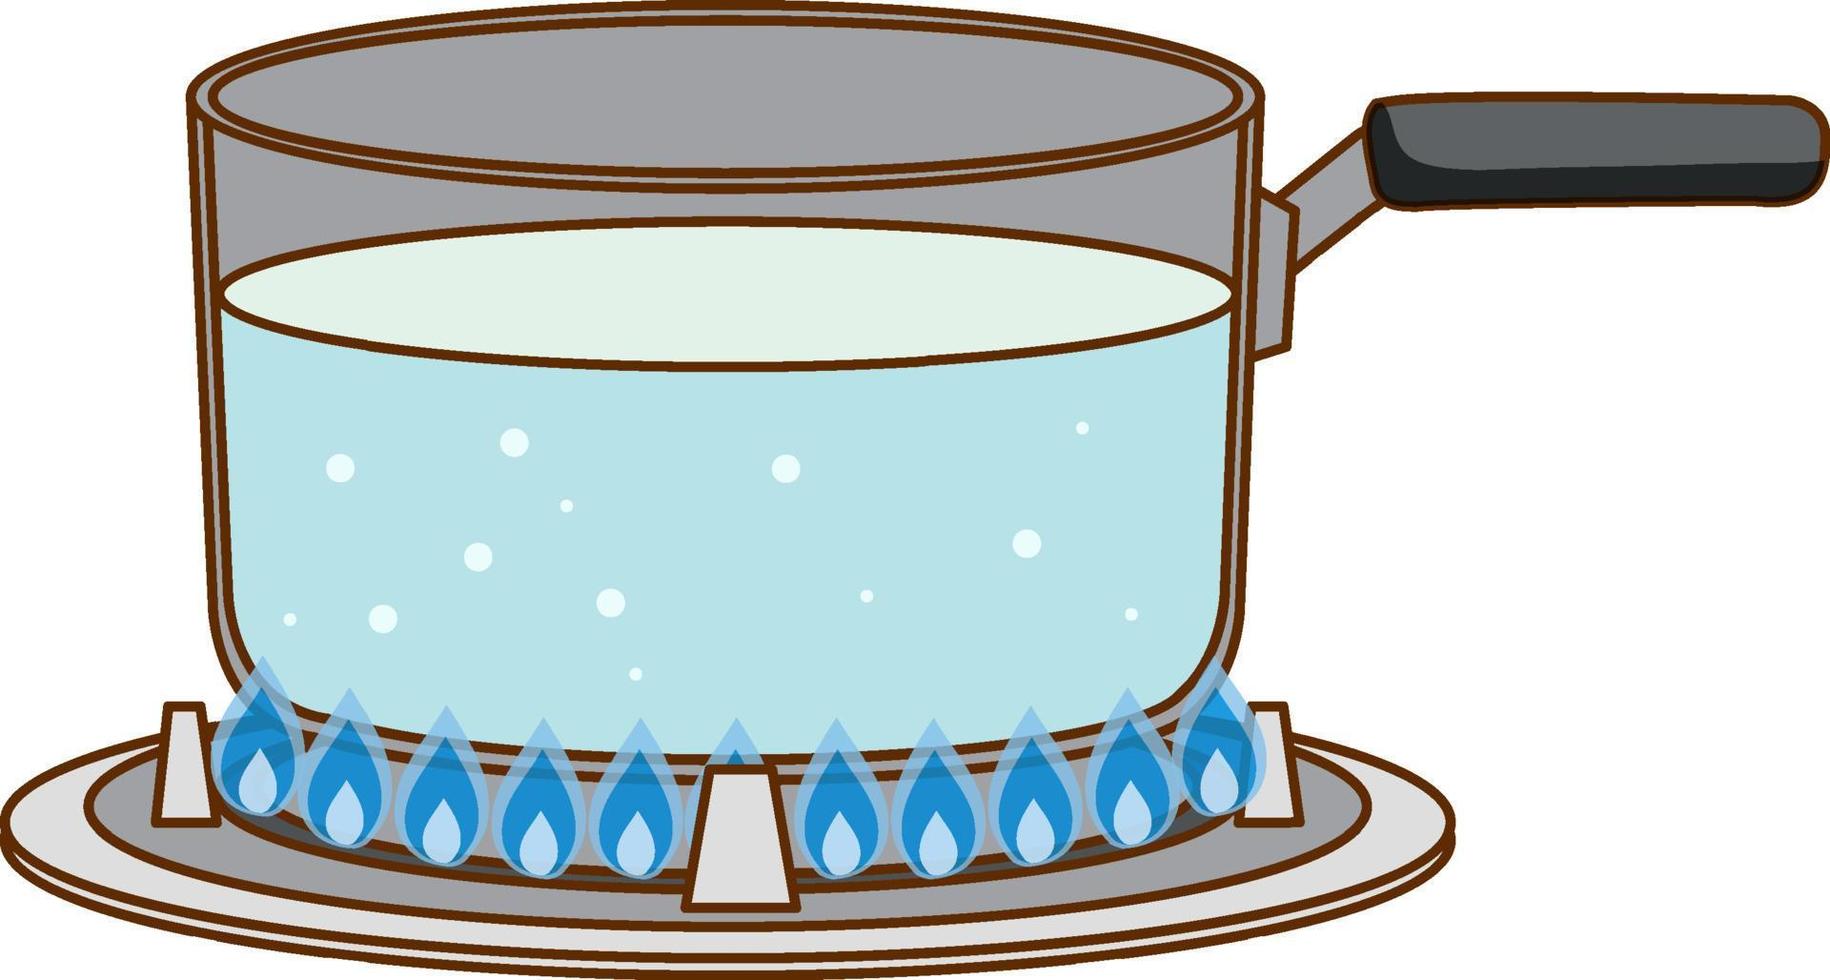 Water pot with a handle is boiling on the gas stove vector